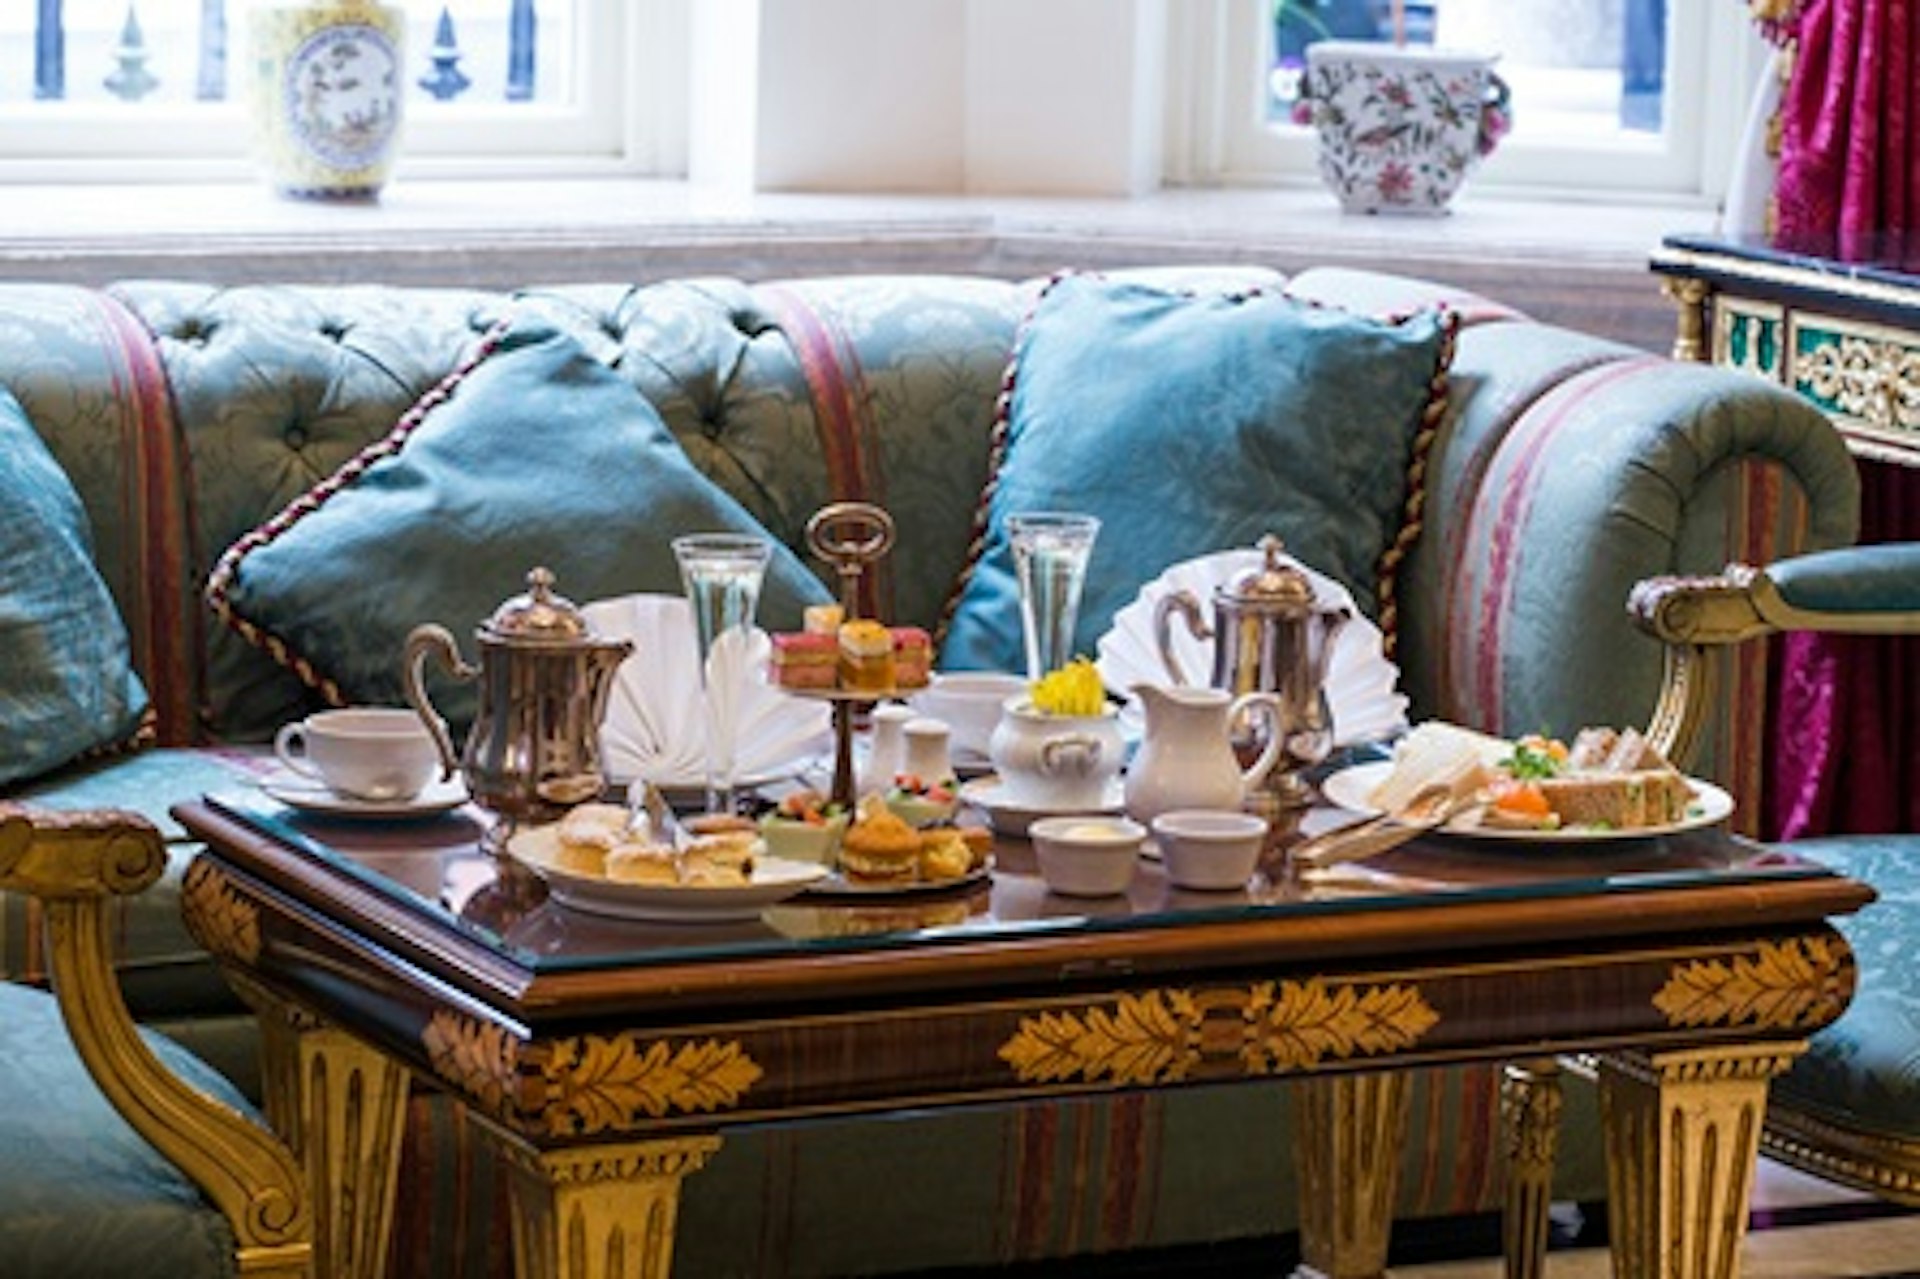 Champagne Afternoon Tea for Two at the 5* Bentley Hotel, London 2